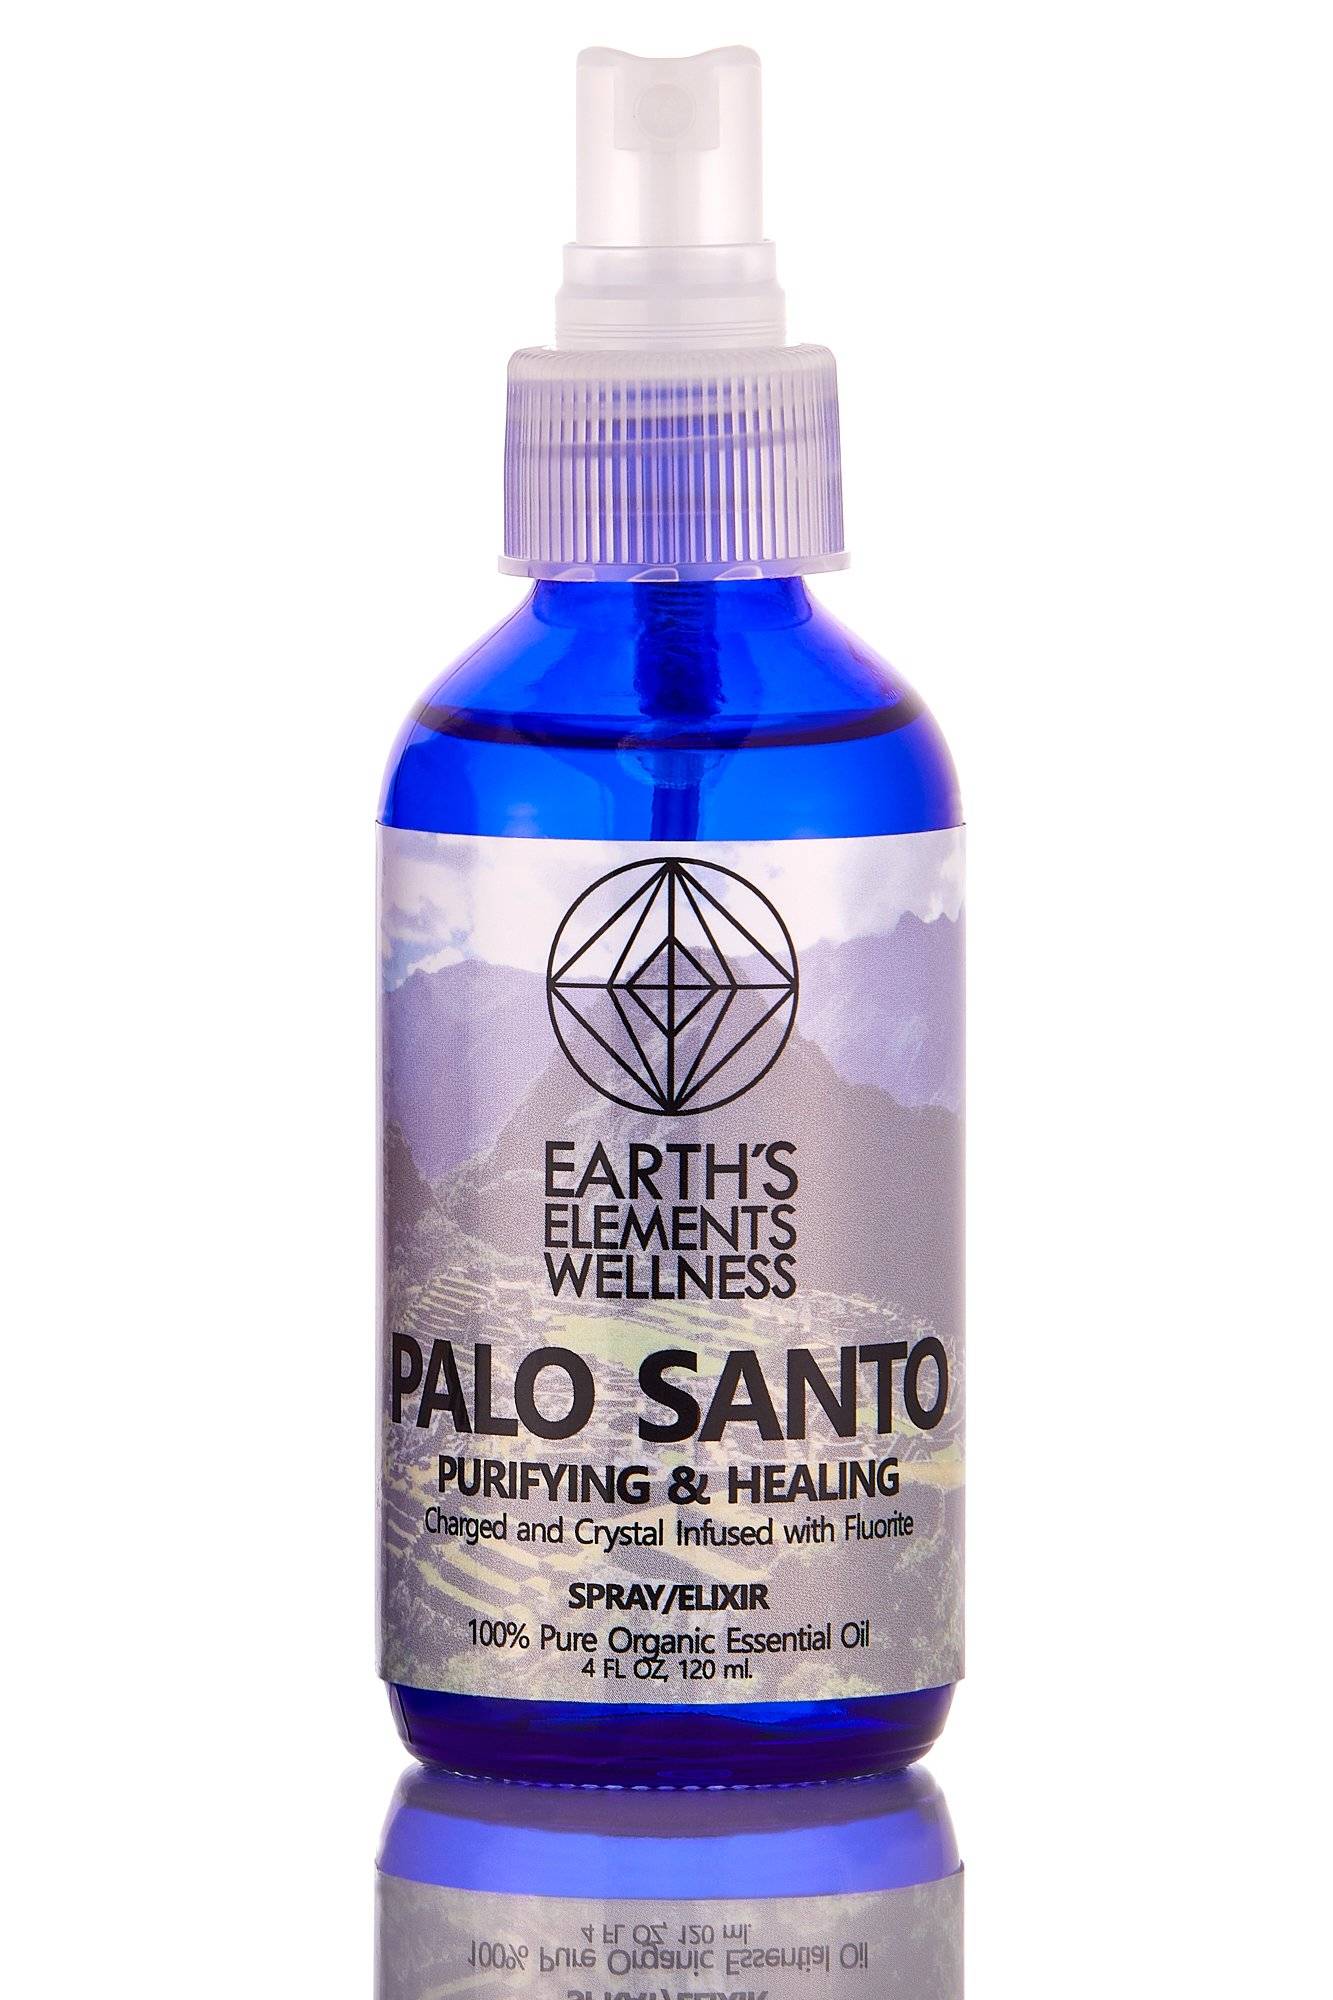 PALO SANTO: Charged and Crystal Infused with Fluorite